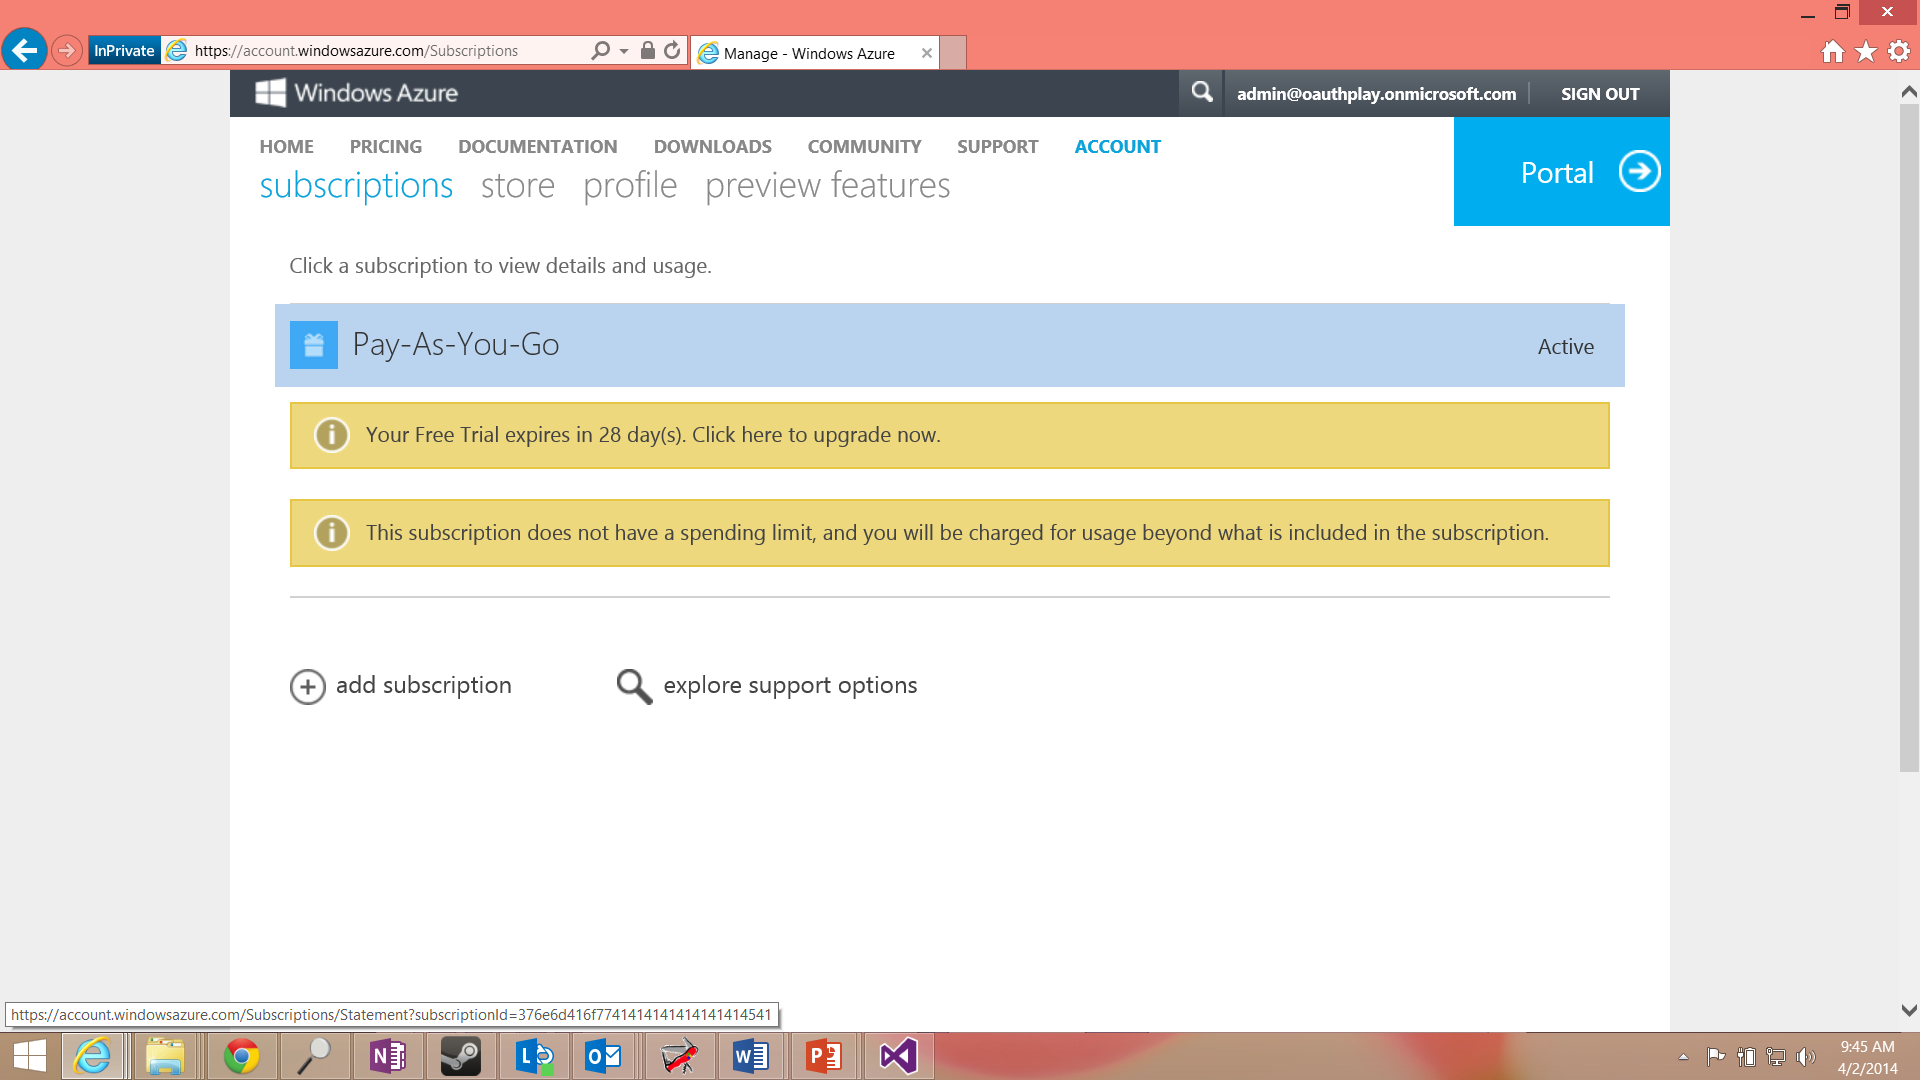 A screenshot of the Azure subscriptions page after successfully upgrading to a pay-as-you-go subscription.